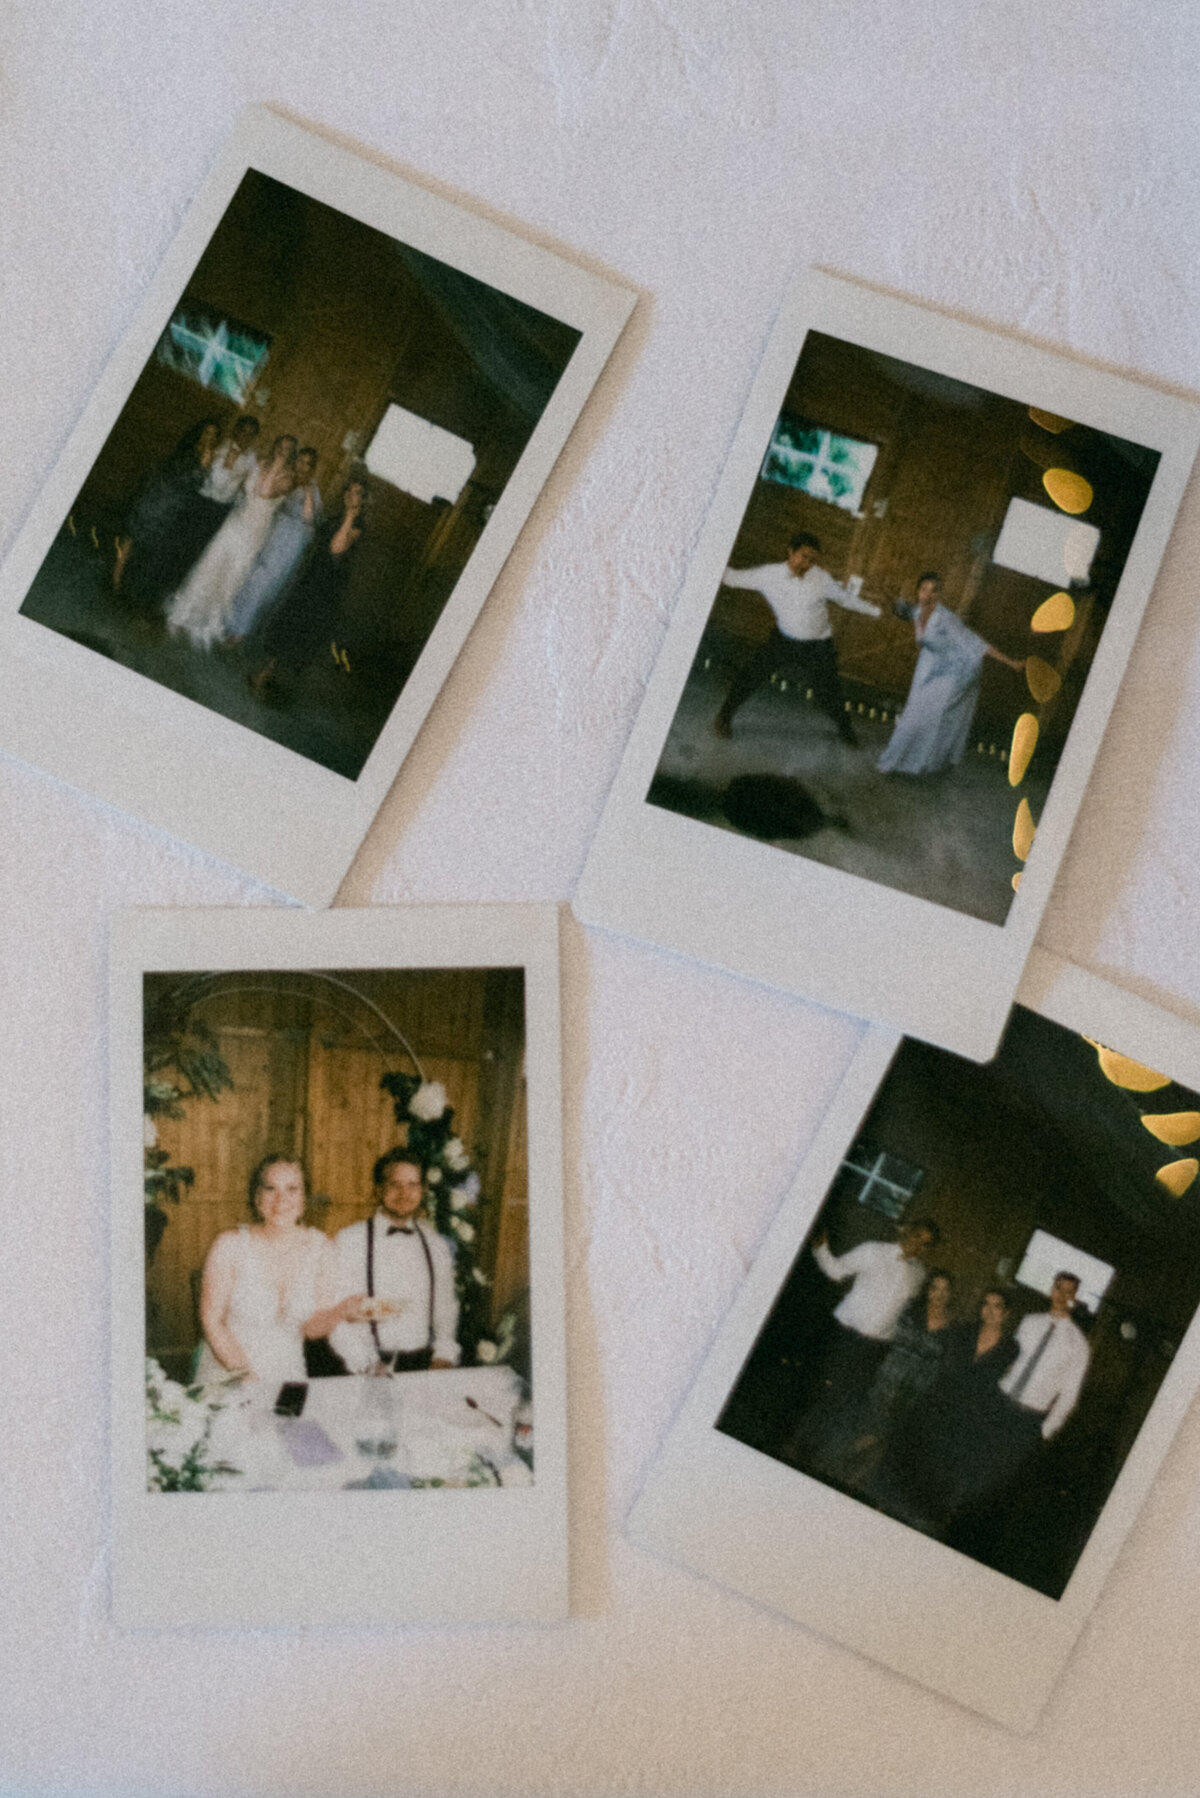 Polaroids on a table in an image captured by wedding photographer Hannika Gabrielsson.